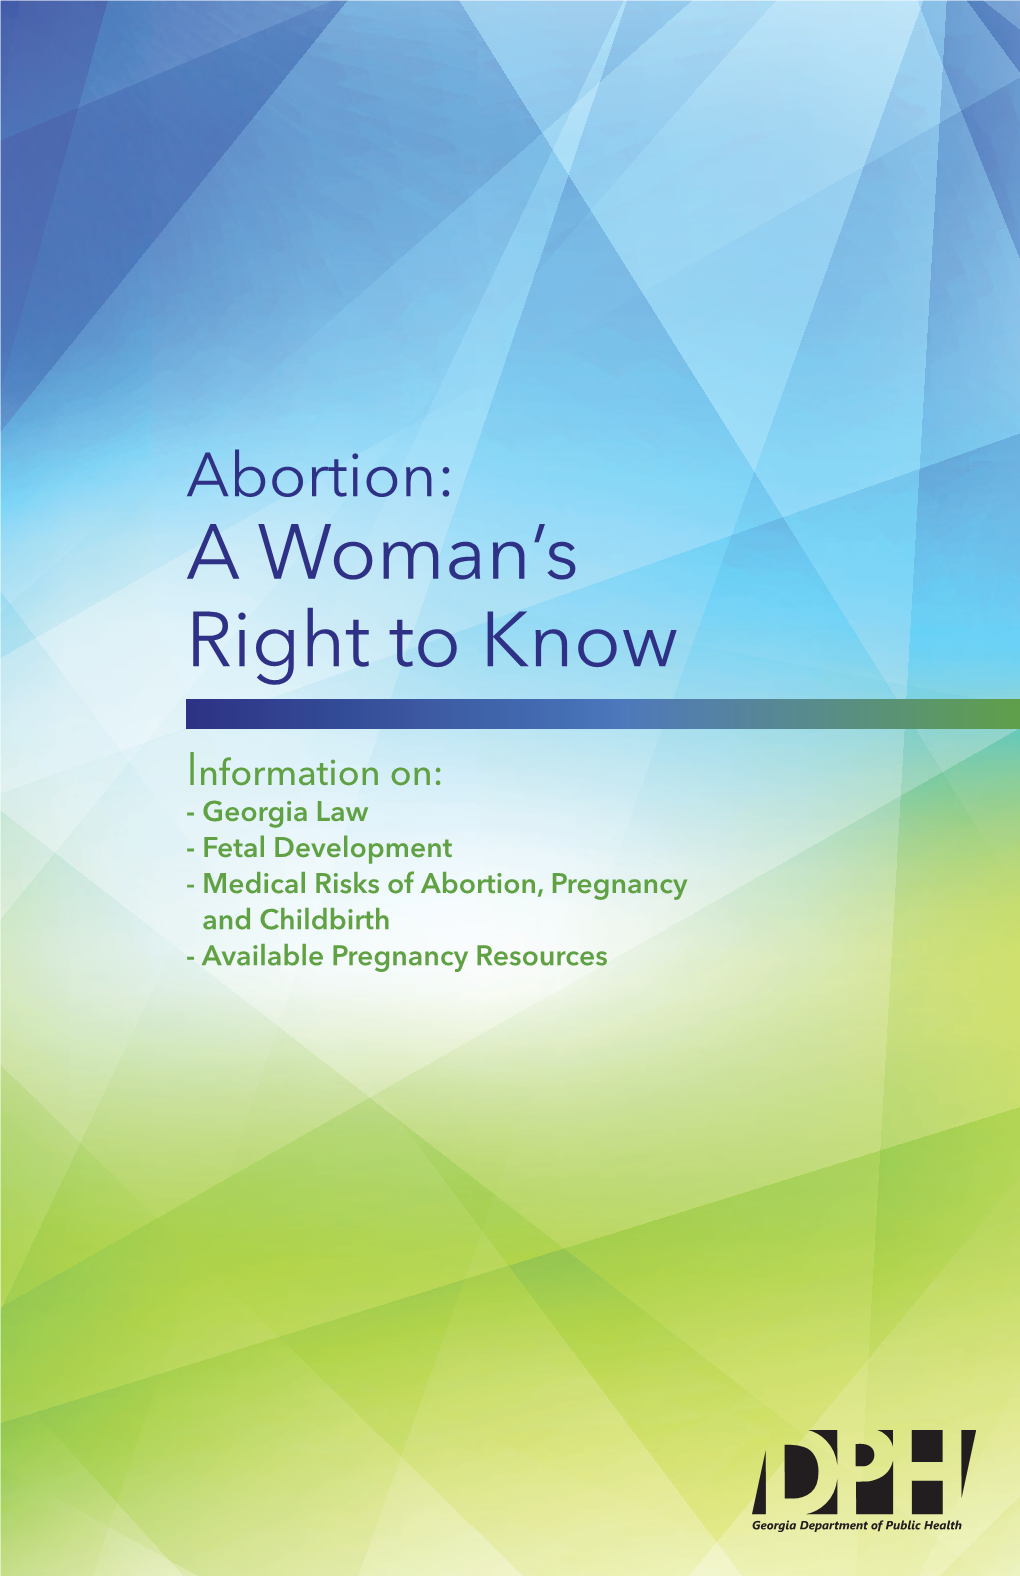 Abortion-A Woman's Right to Know